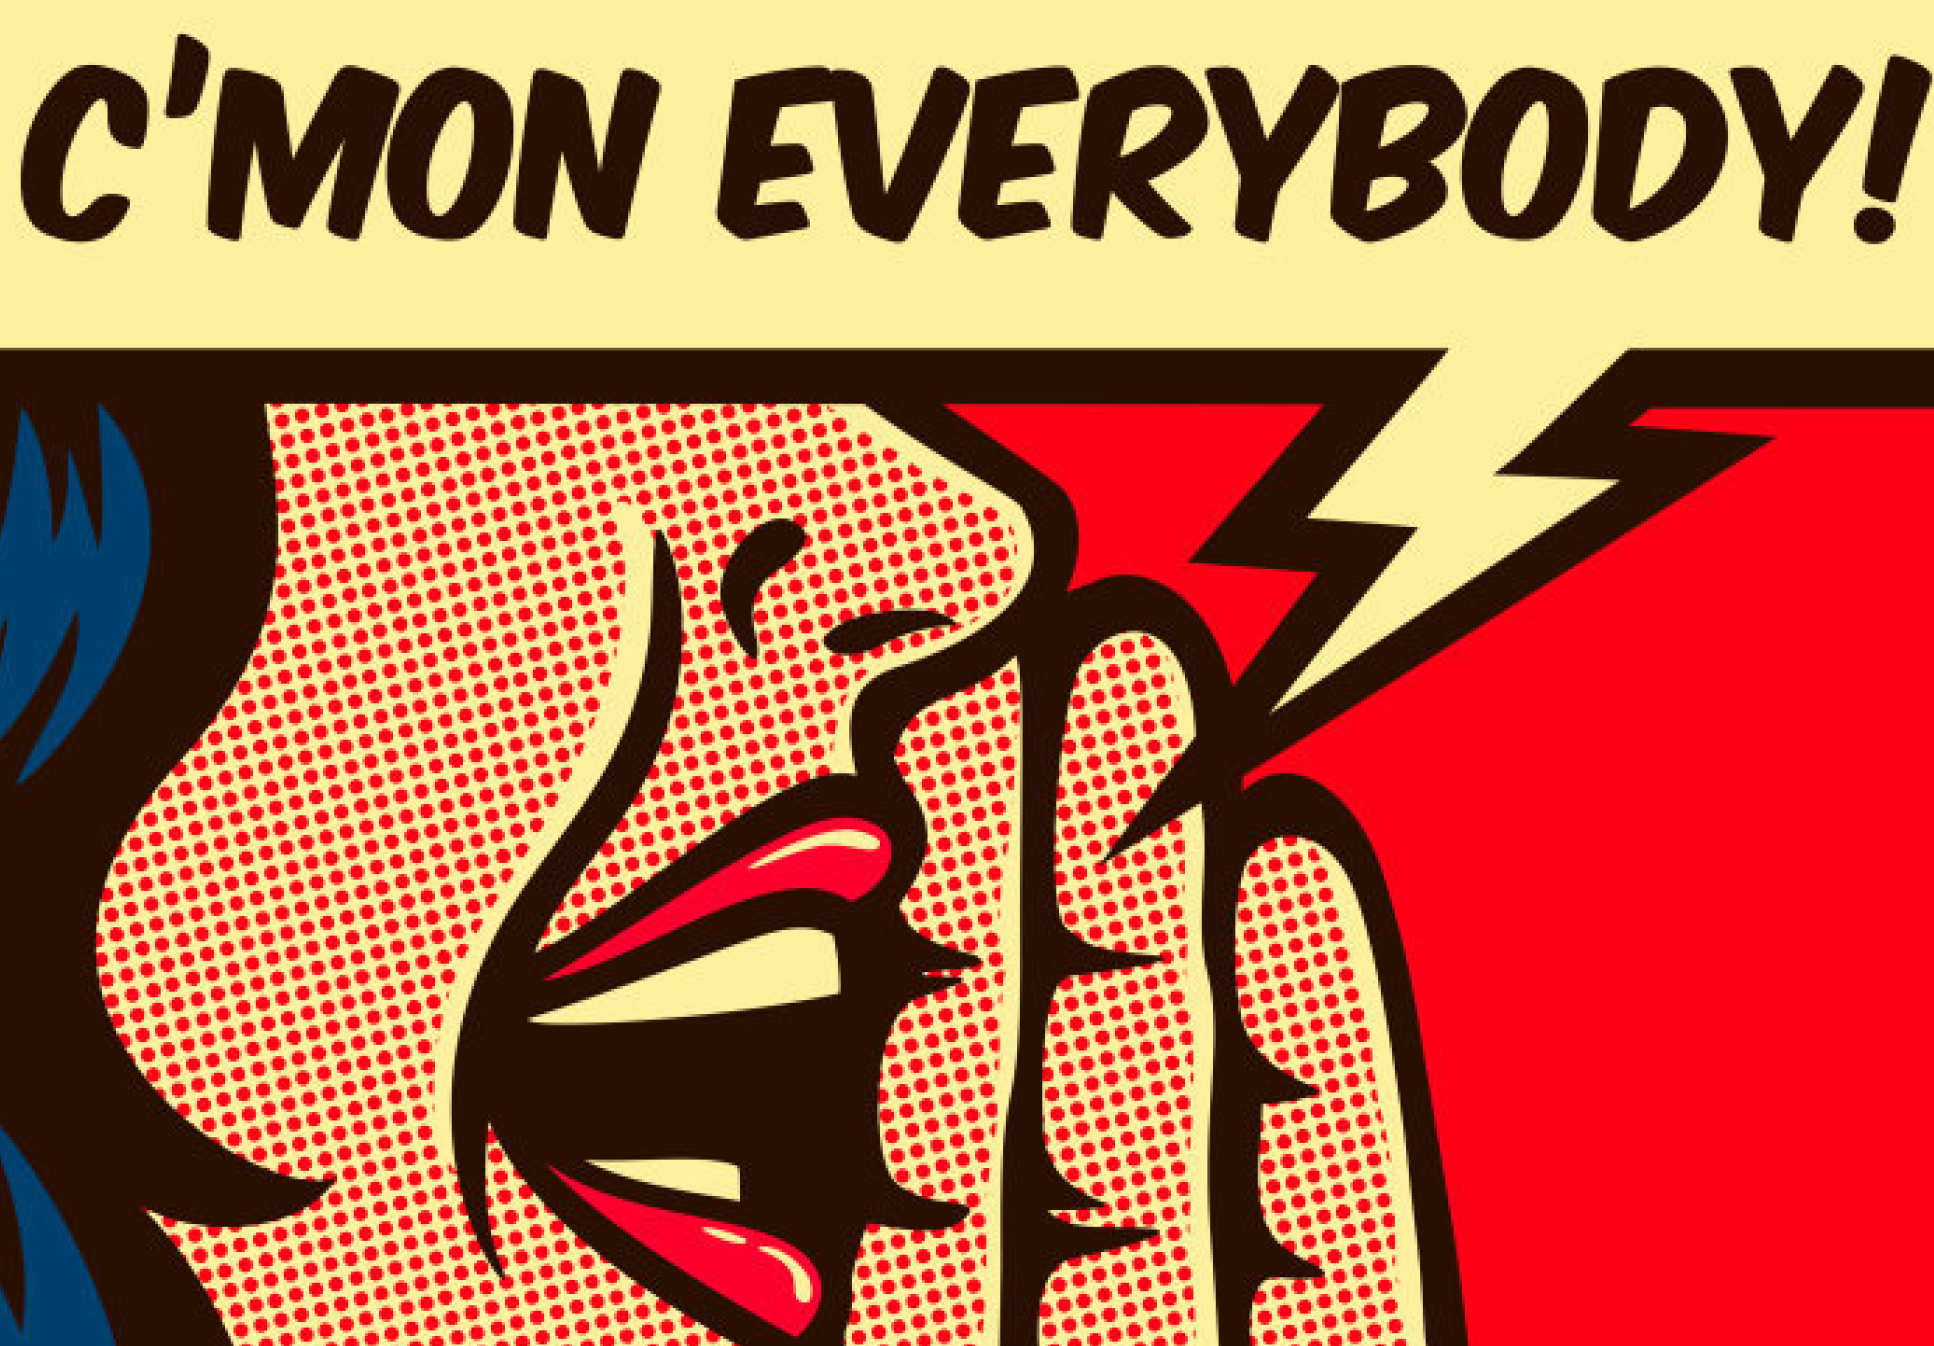 Popart piece of woman shouting 'C'mon everybody!'